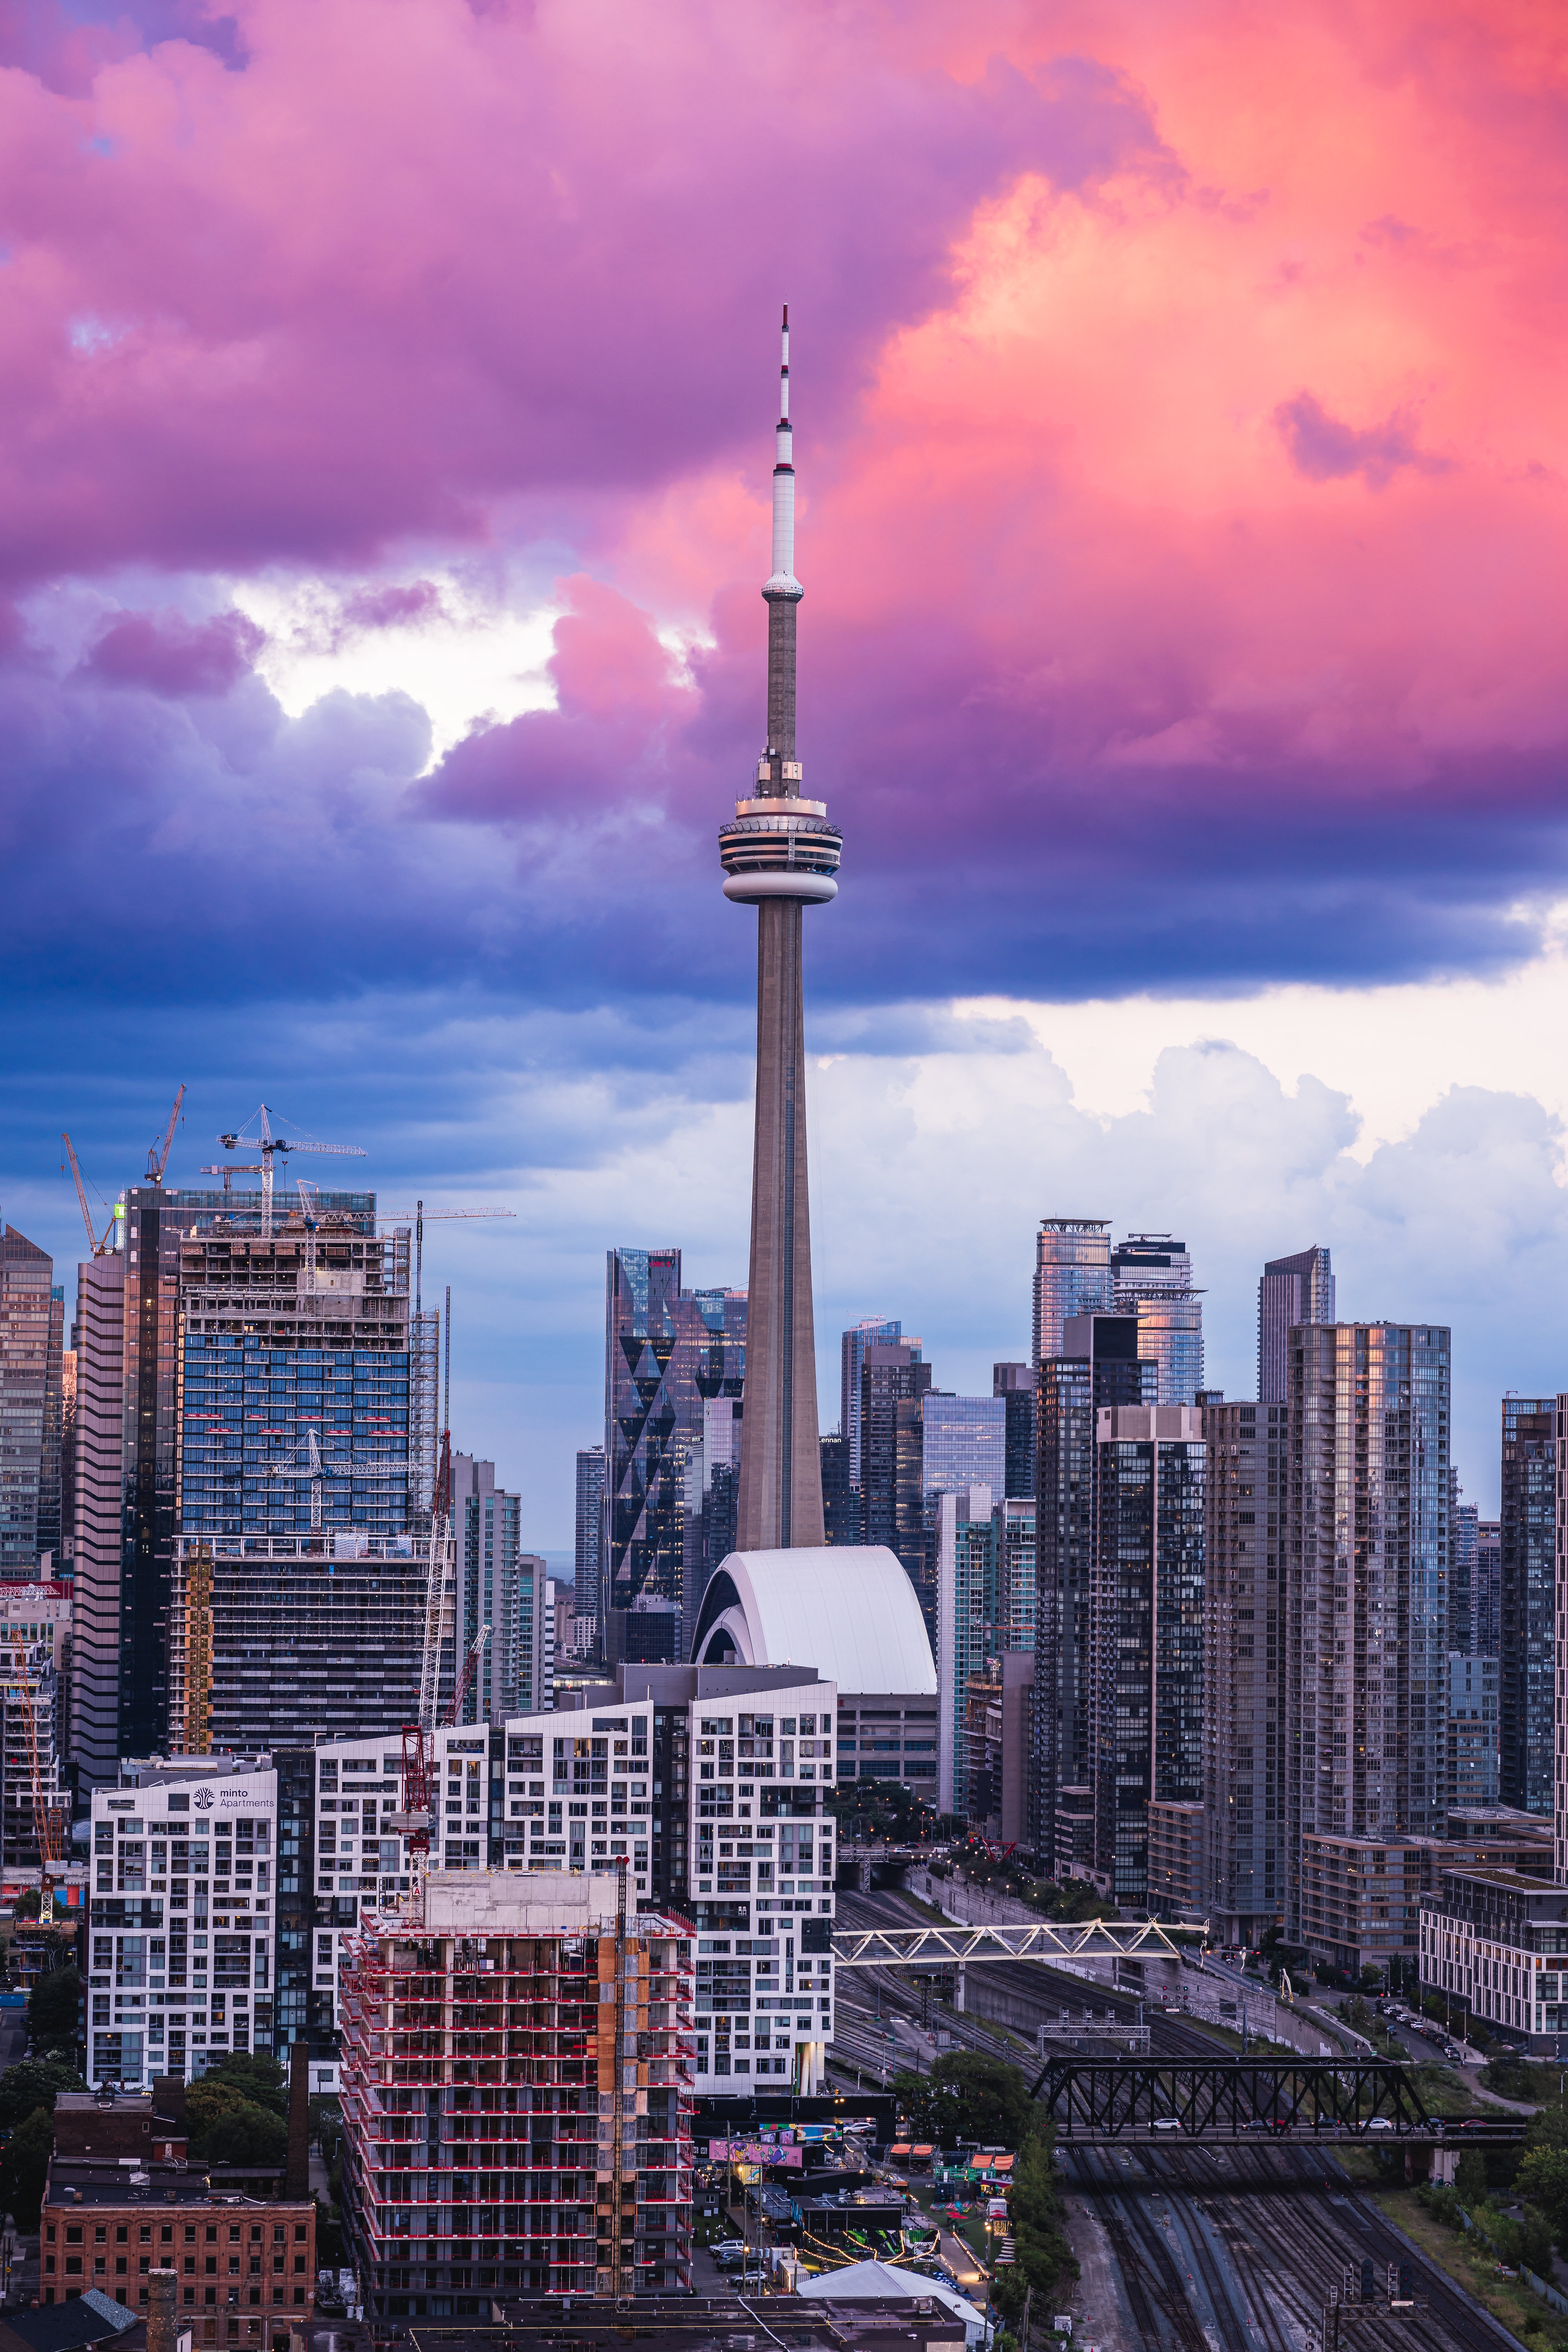 HD wallpaper, Cn Tower, Tourist Attraction, Aesthetic, Ontario, Toronto, Pink Clouds